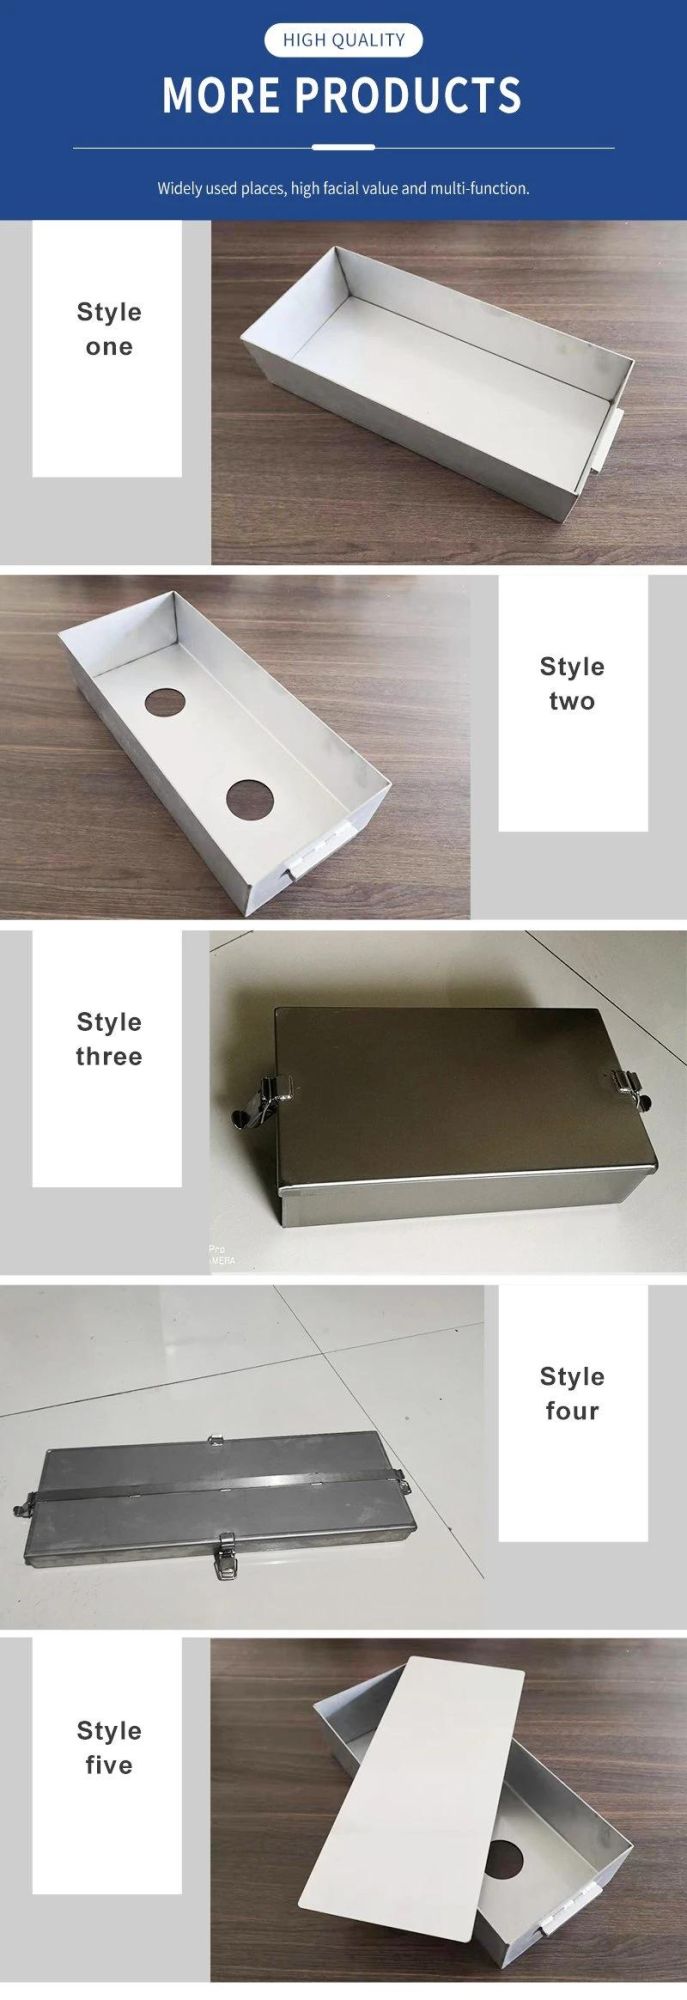 High Quality & Best Price Plastic Speaker Box Mold by Chinese Supplier